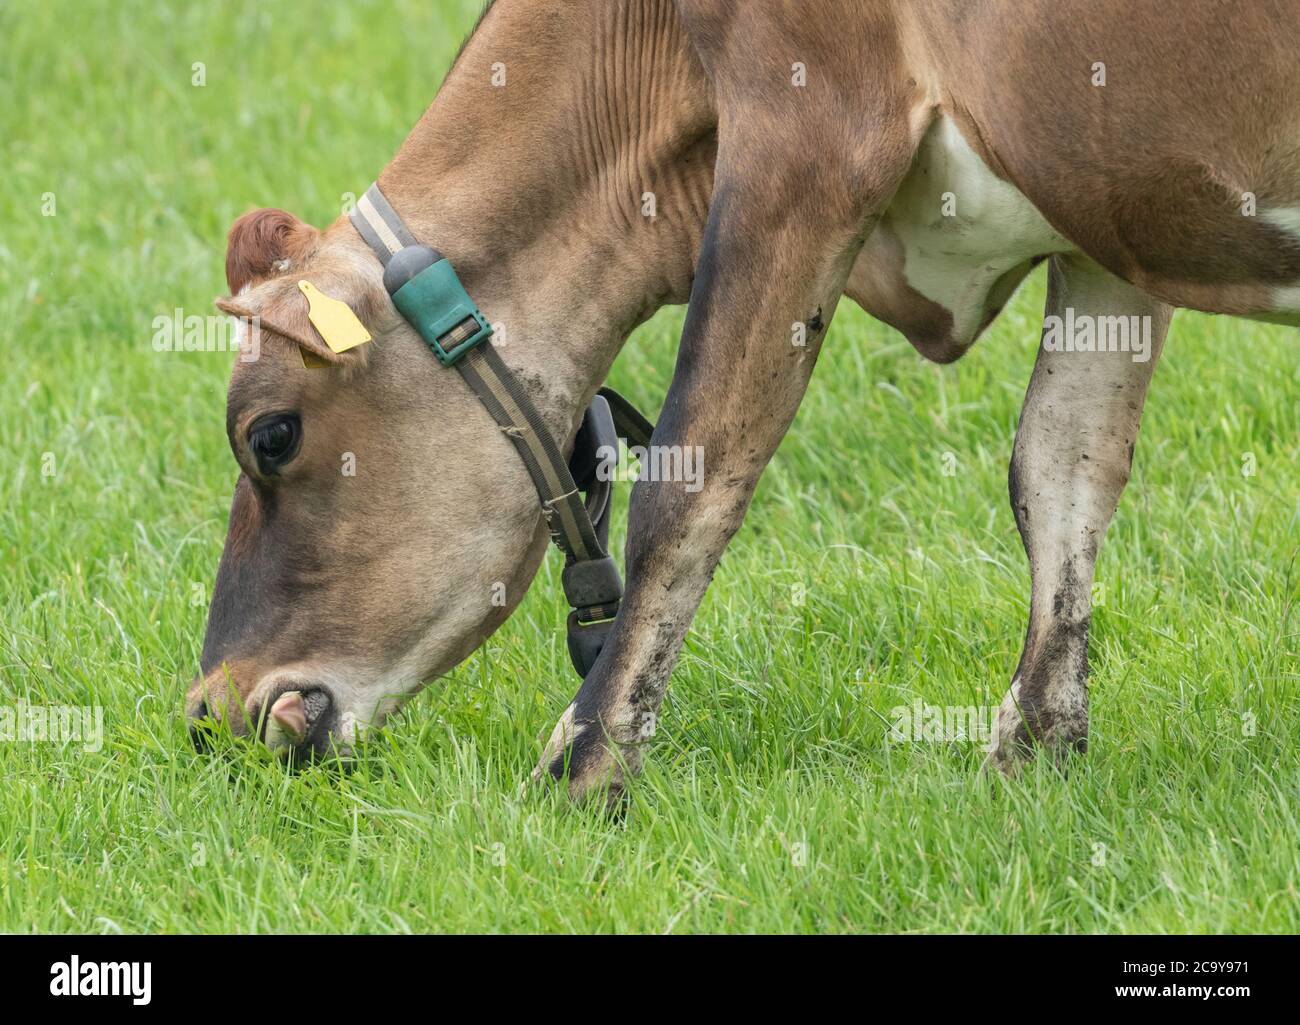 A Jersey Dairy Cow grazing in Yorkshire, England. The cow is wearing a cow collar and ear tags. Stock Photo